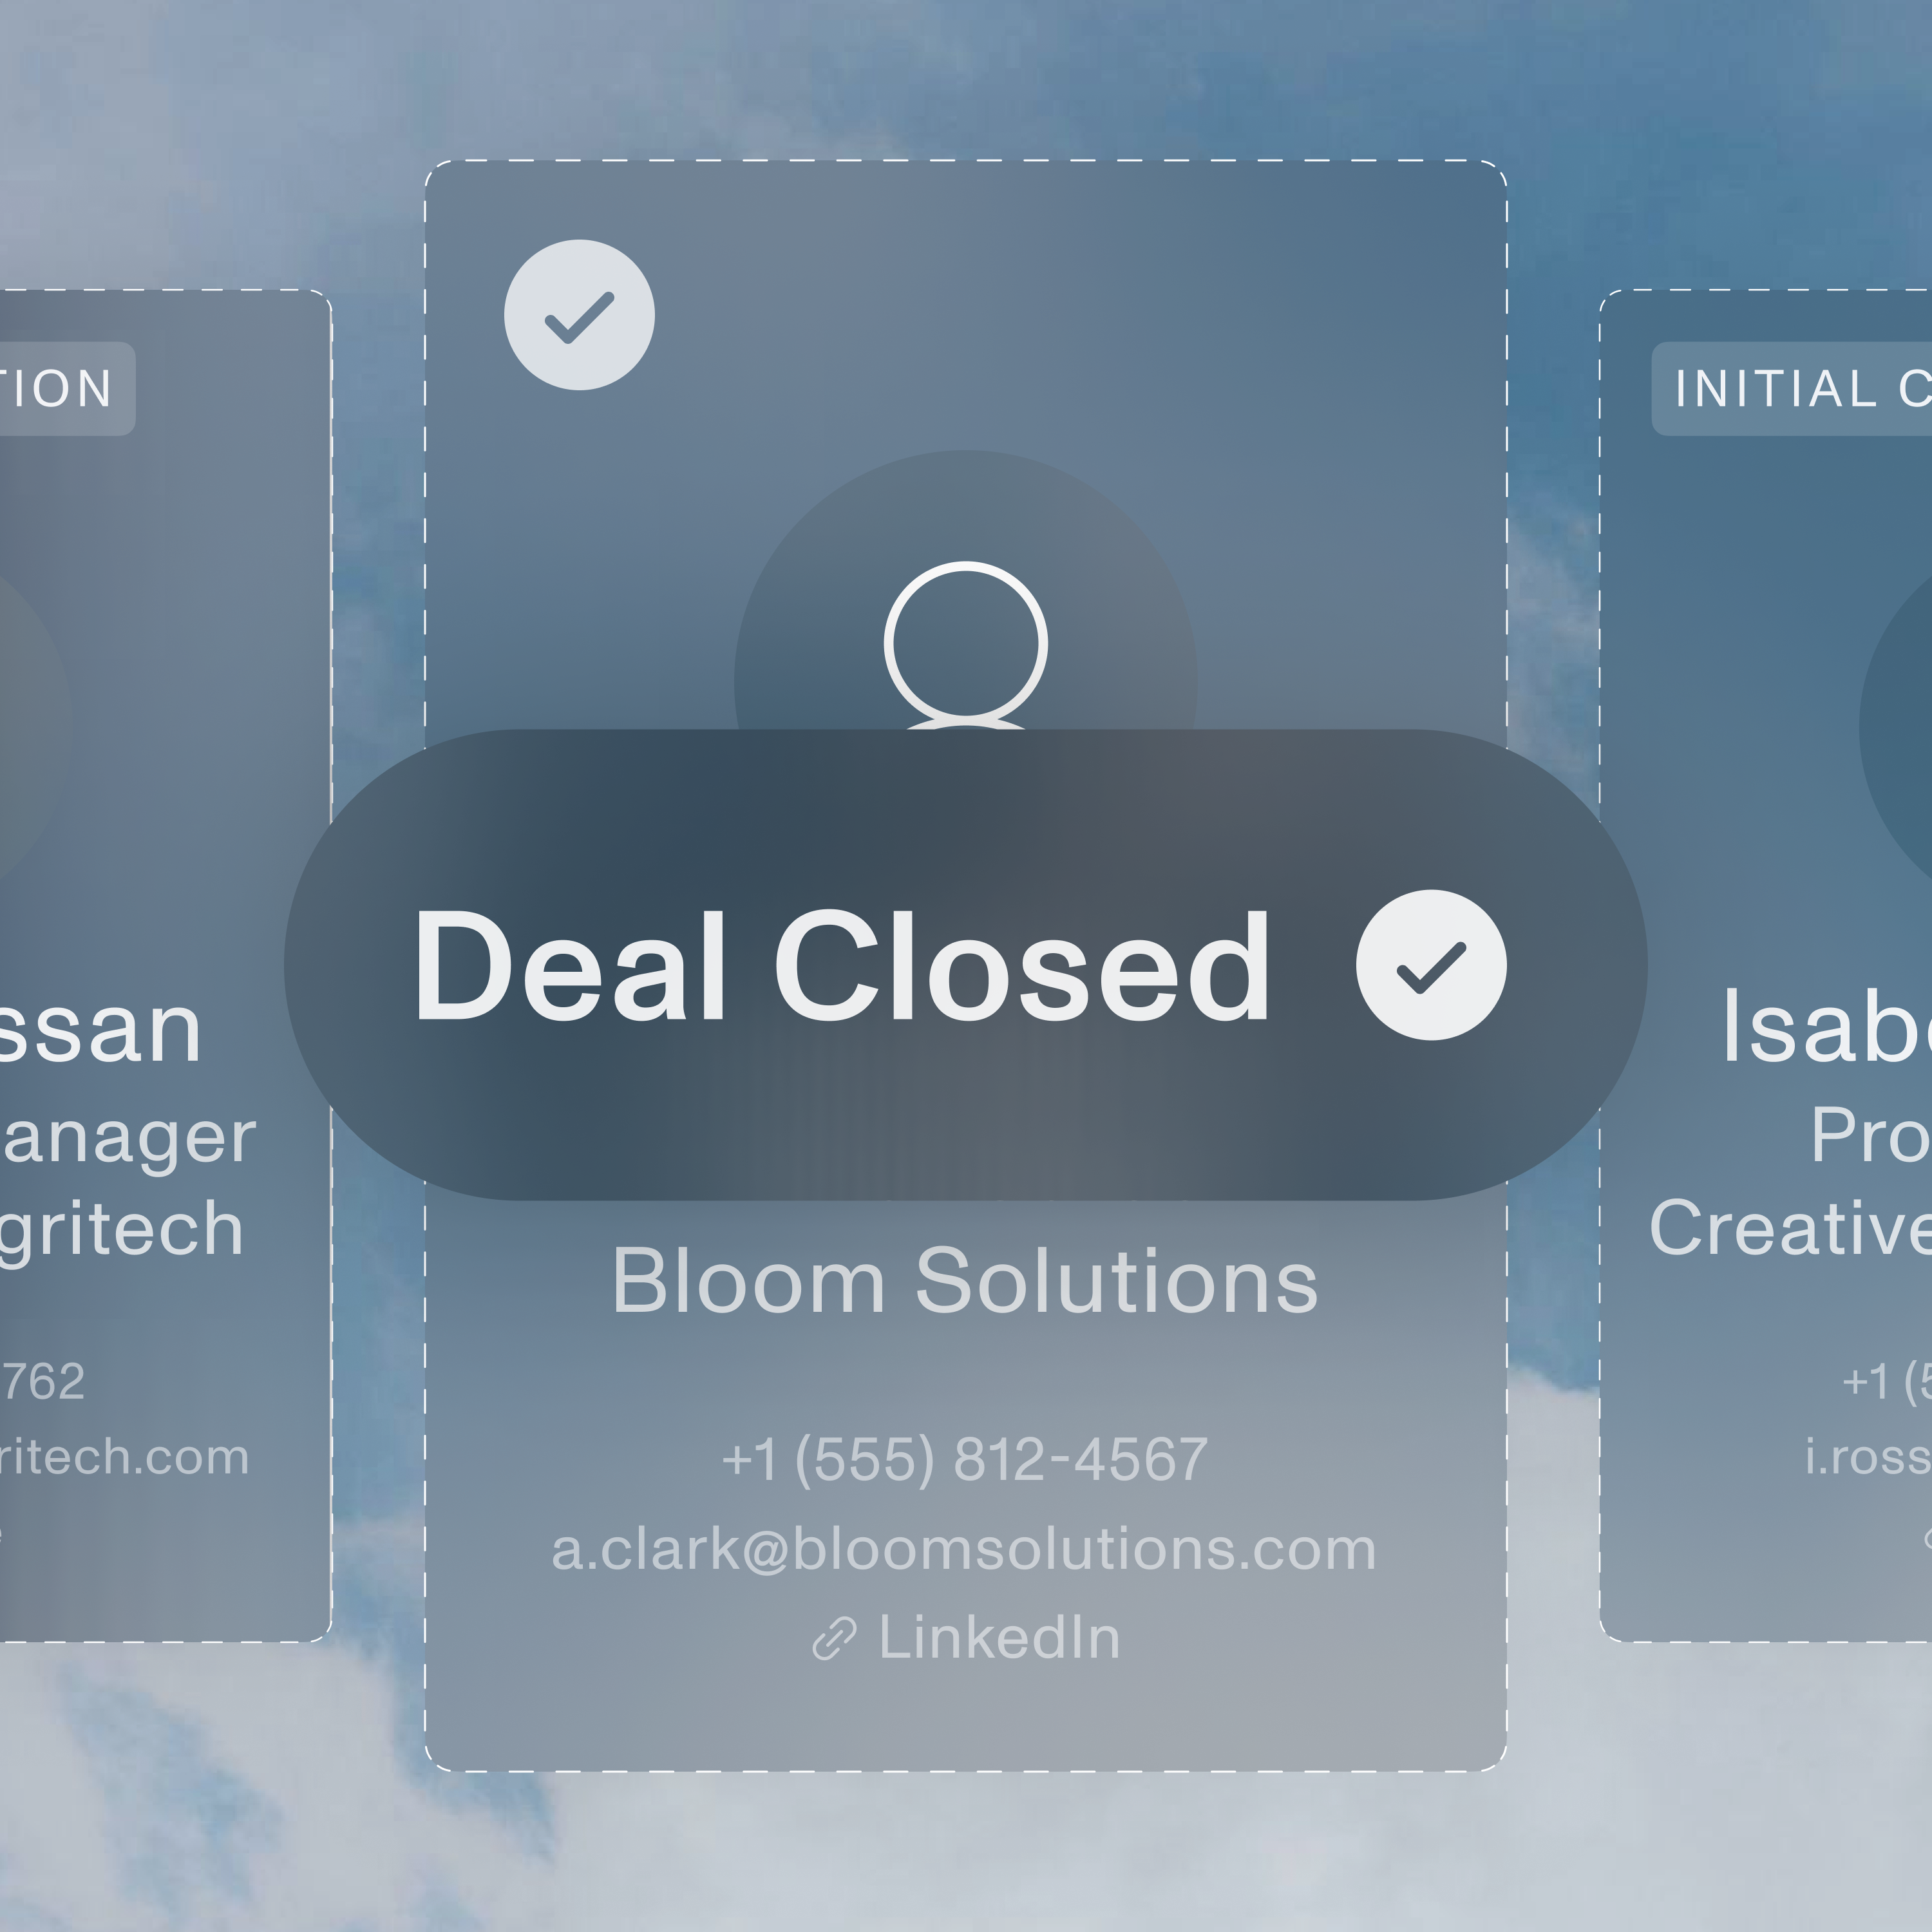 A contact card that shows the deal has been successfully negotiated and closed.